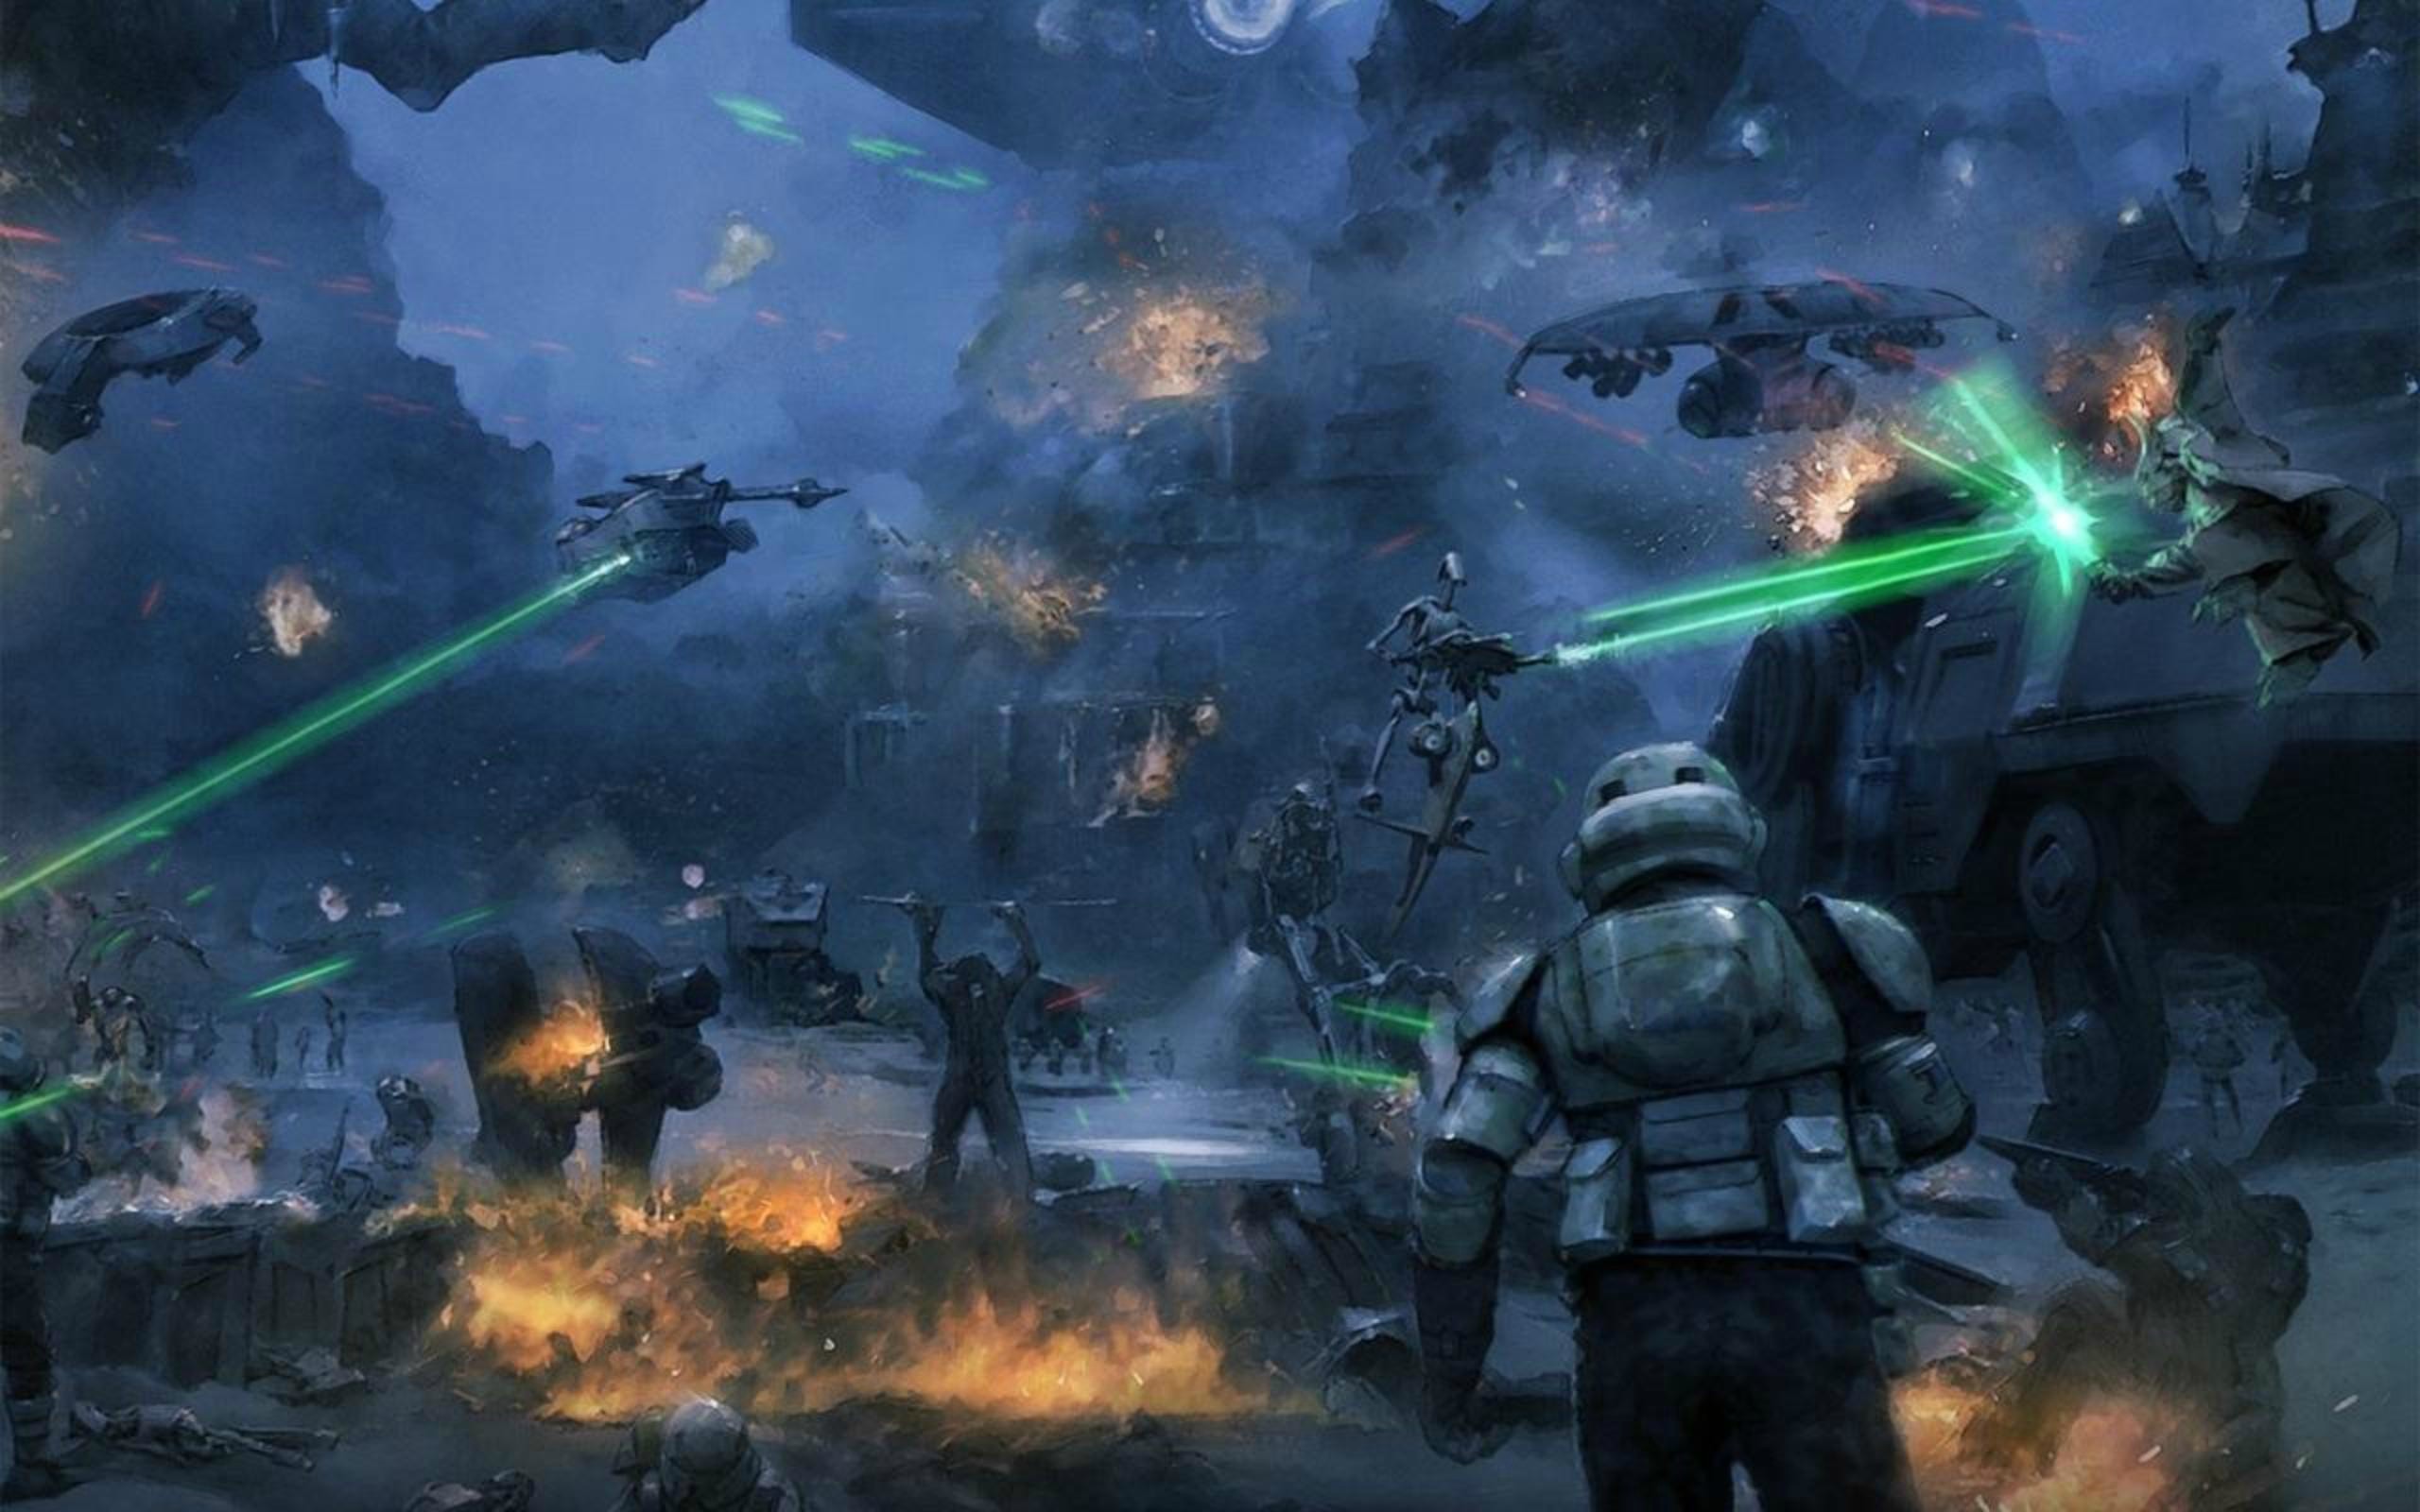 Part of the Battle of Kashyyyk. Two troopers of the 501st